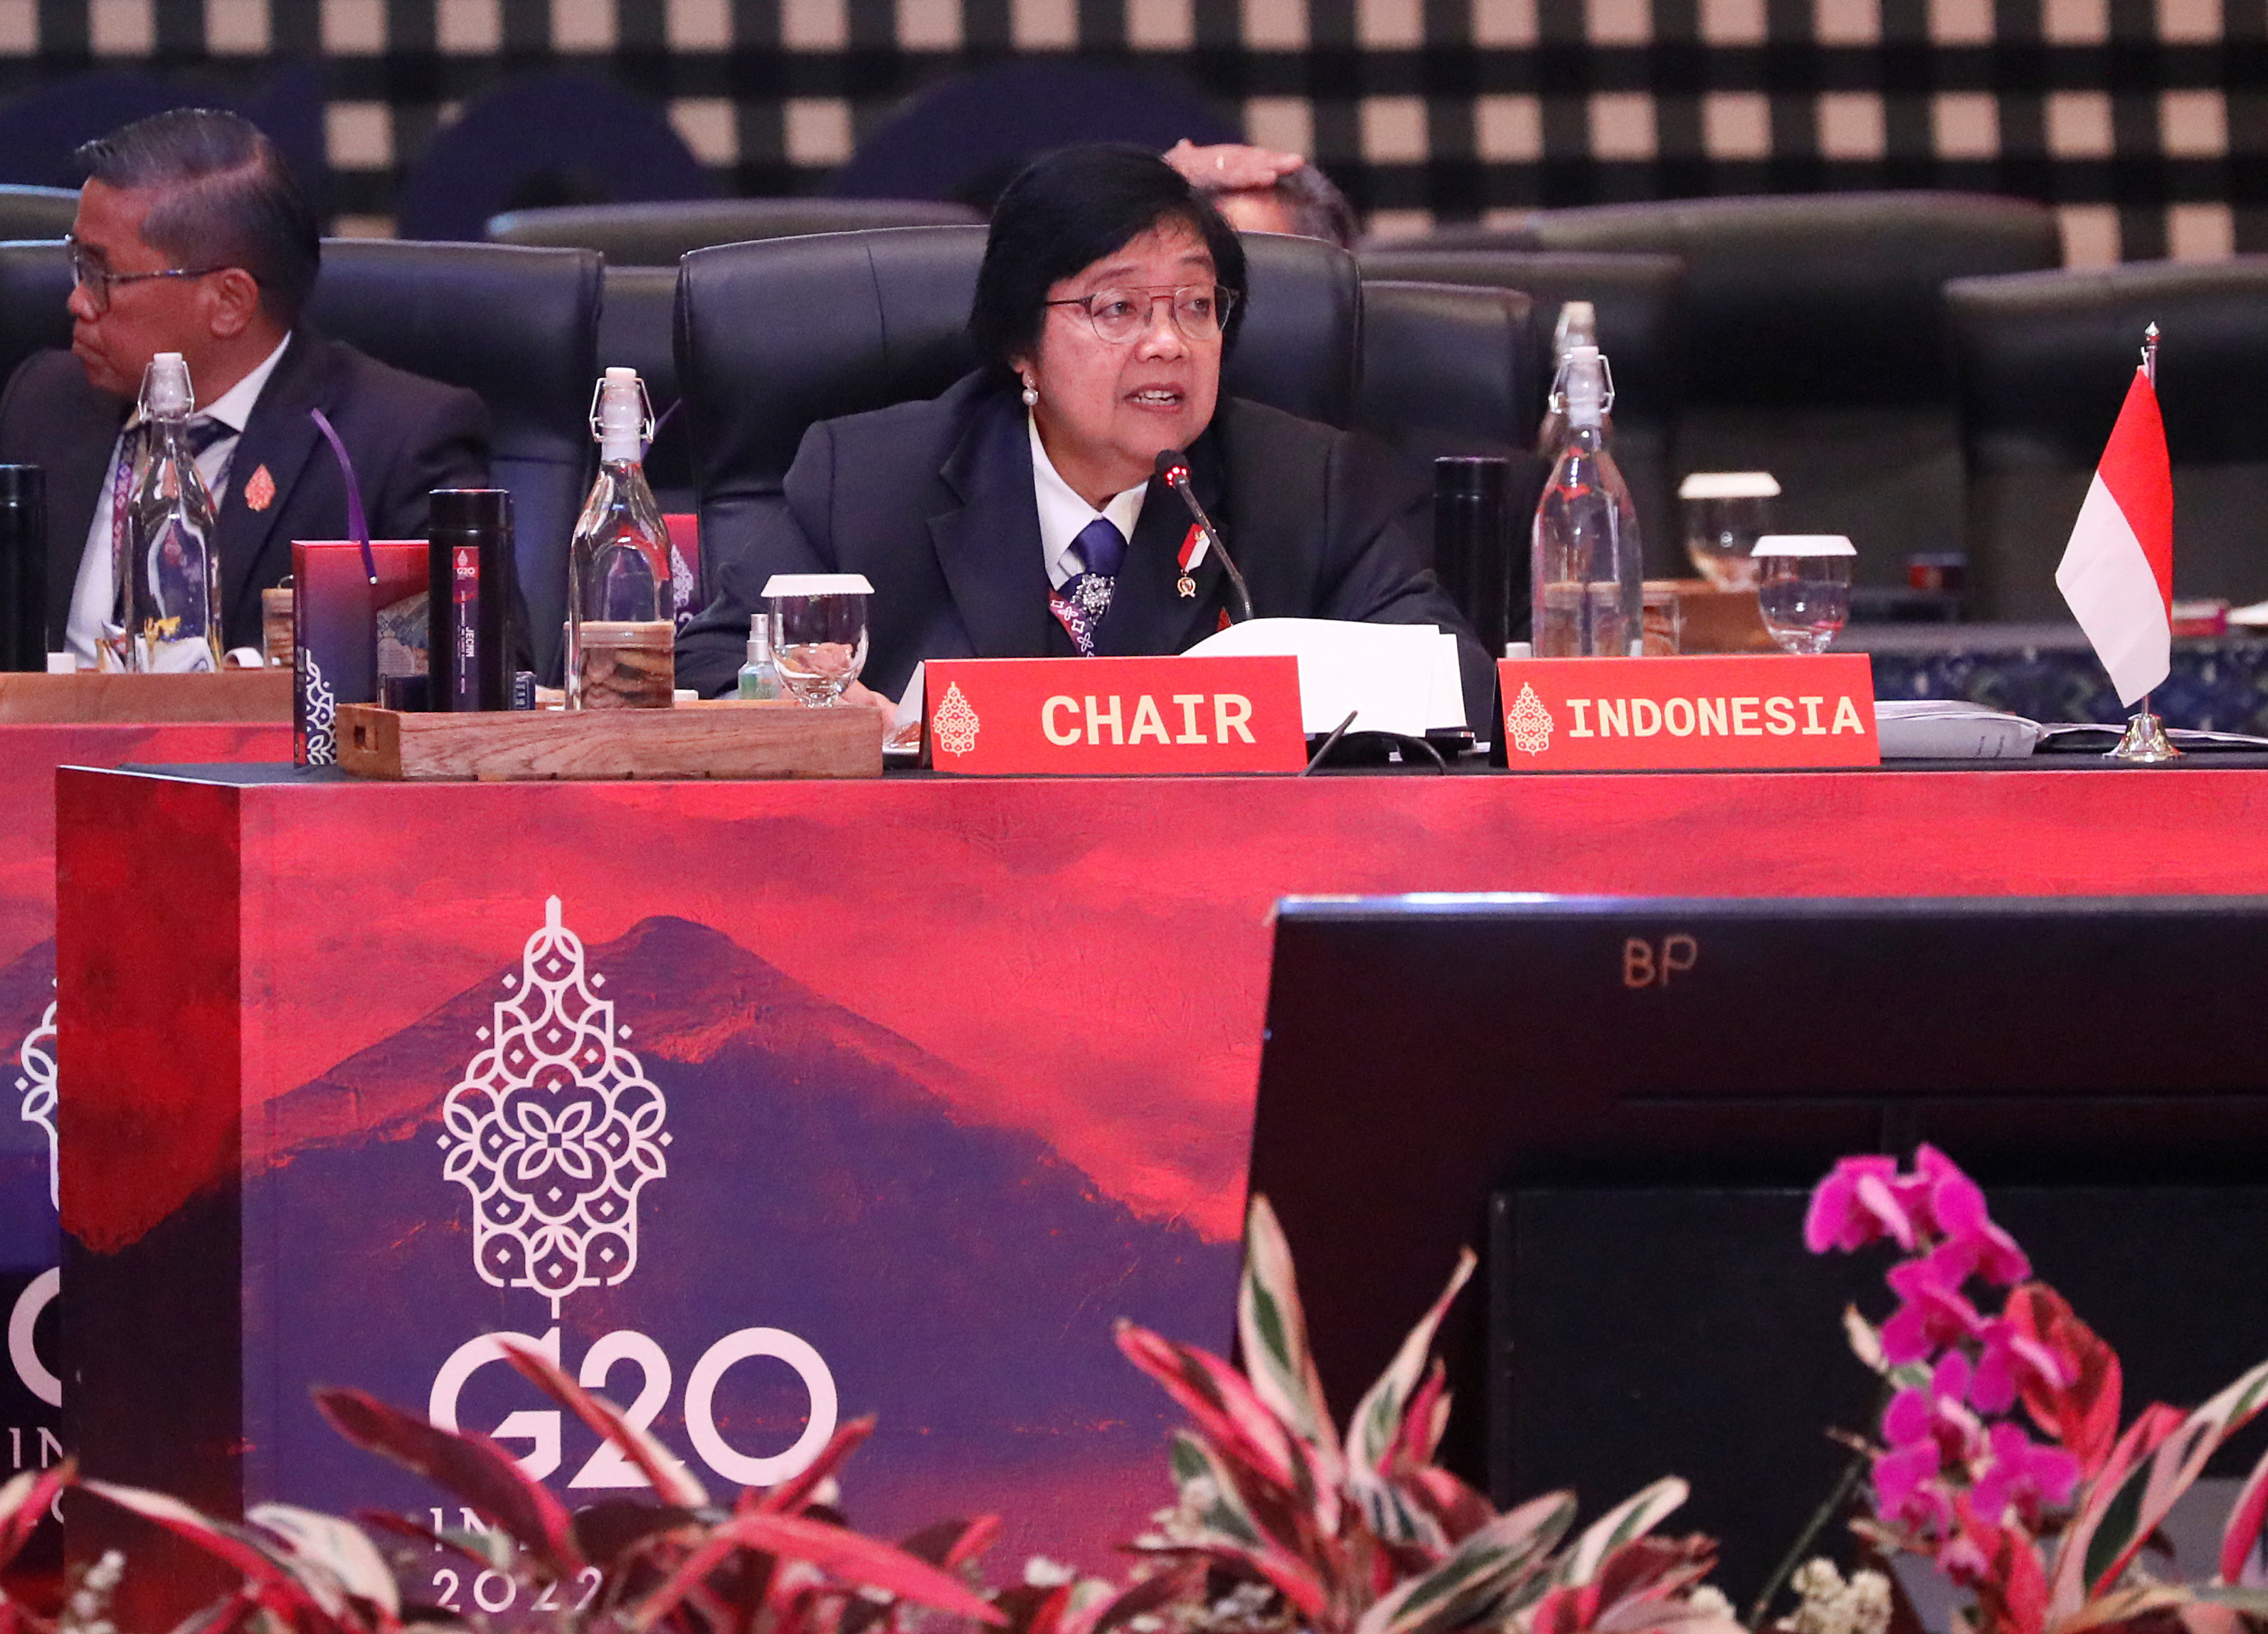 G20 Environment and Climate Ministerial Meeting in Bali